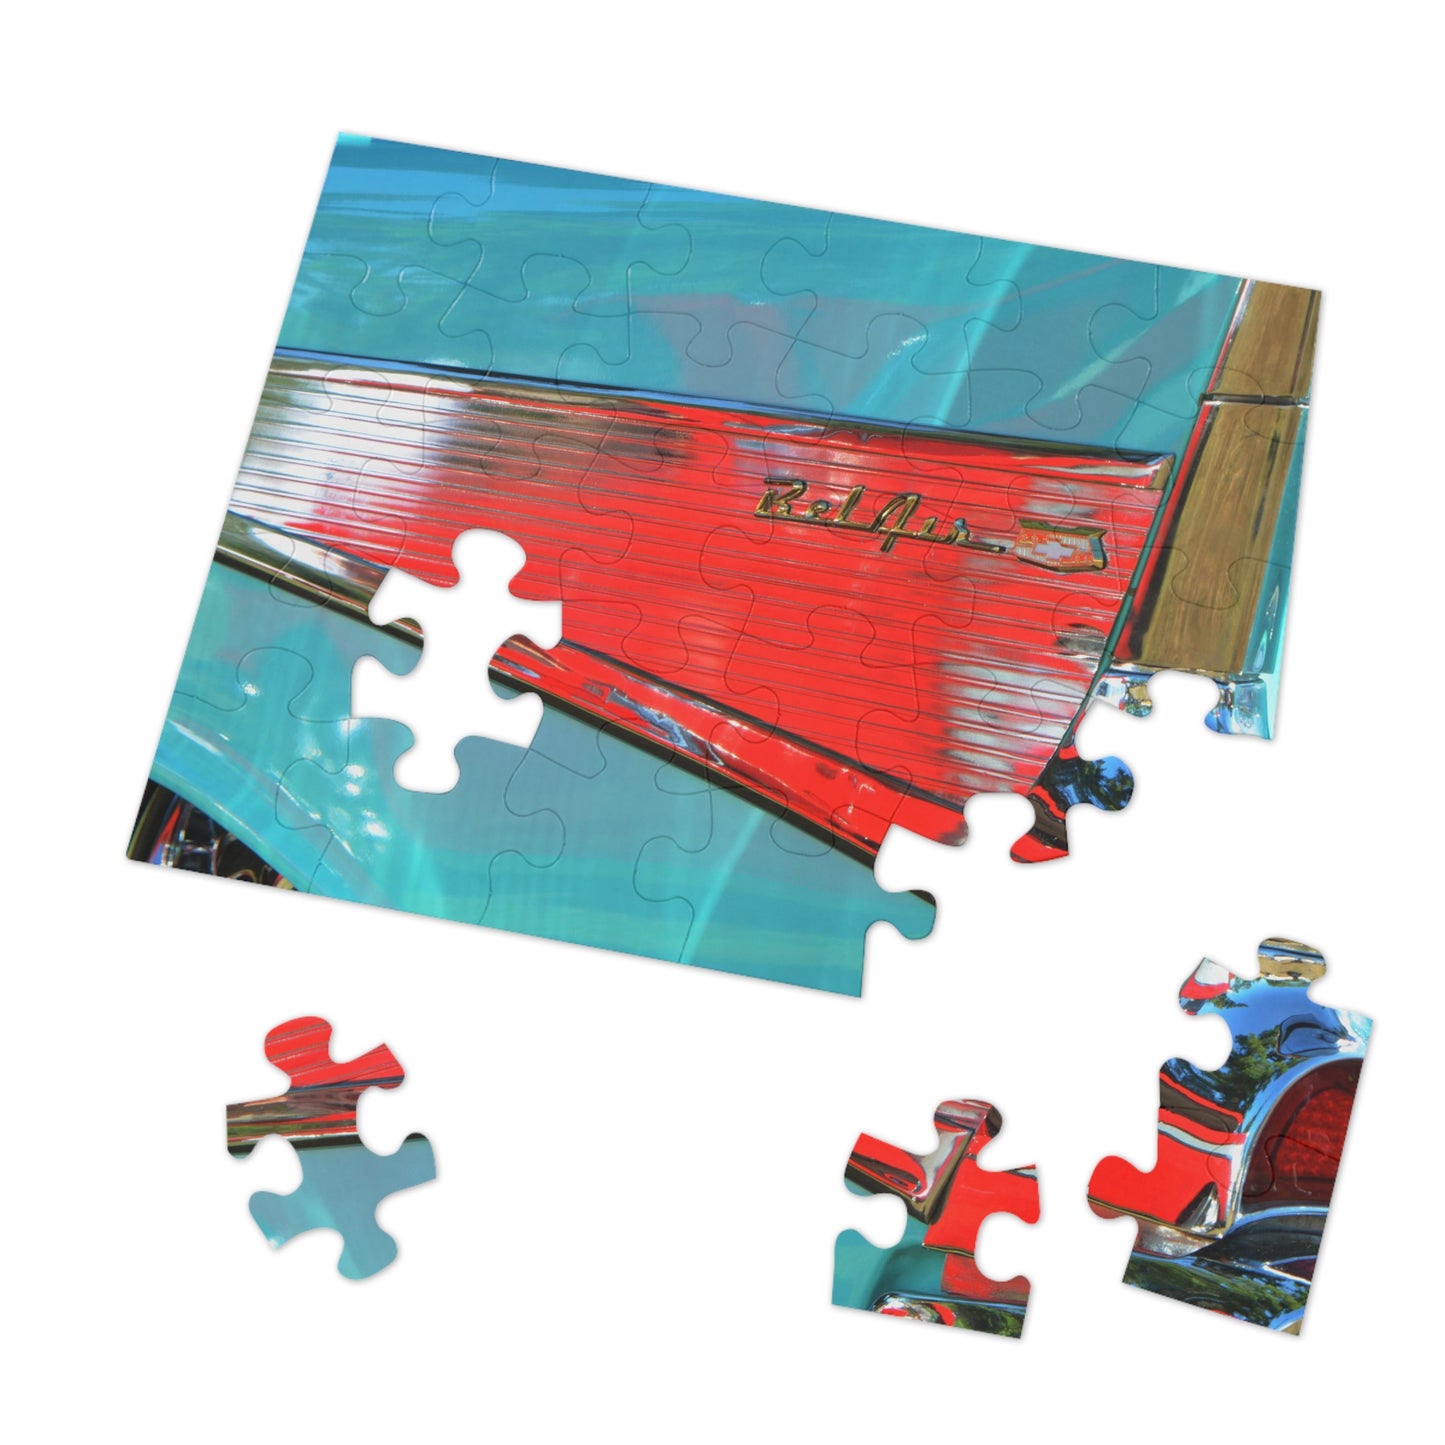 Chevy Bel Air Jigsaw Puzzle (30, 110, 252, 500,1000-Piece)